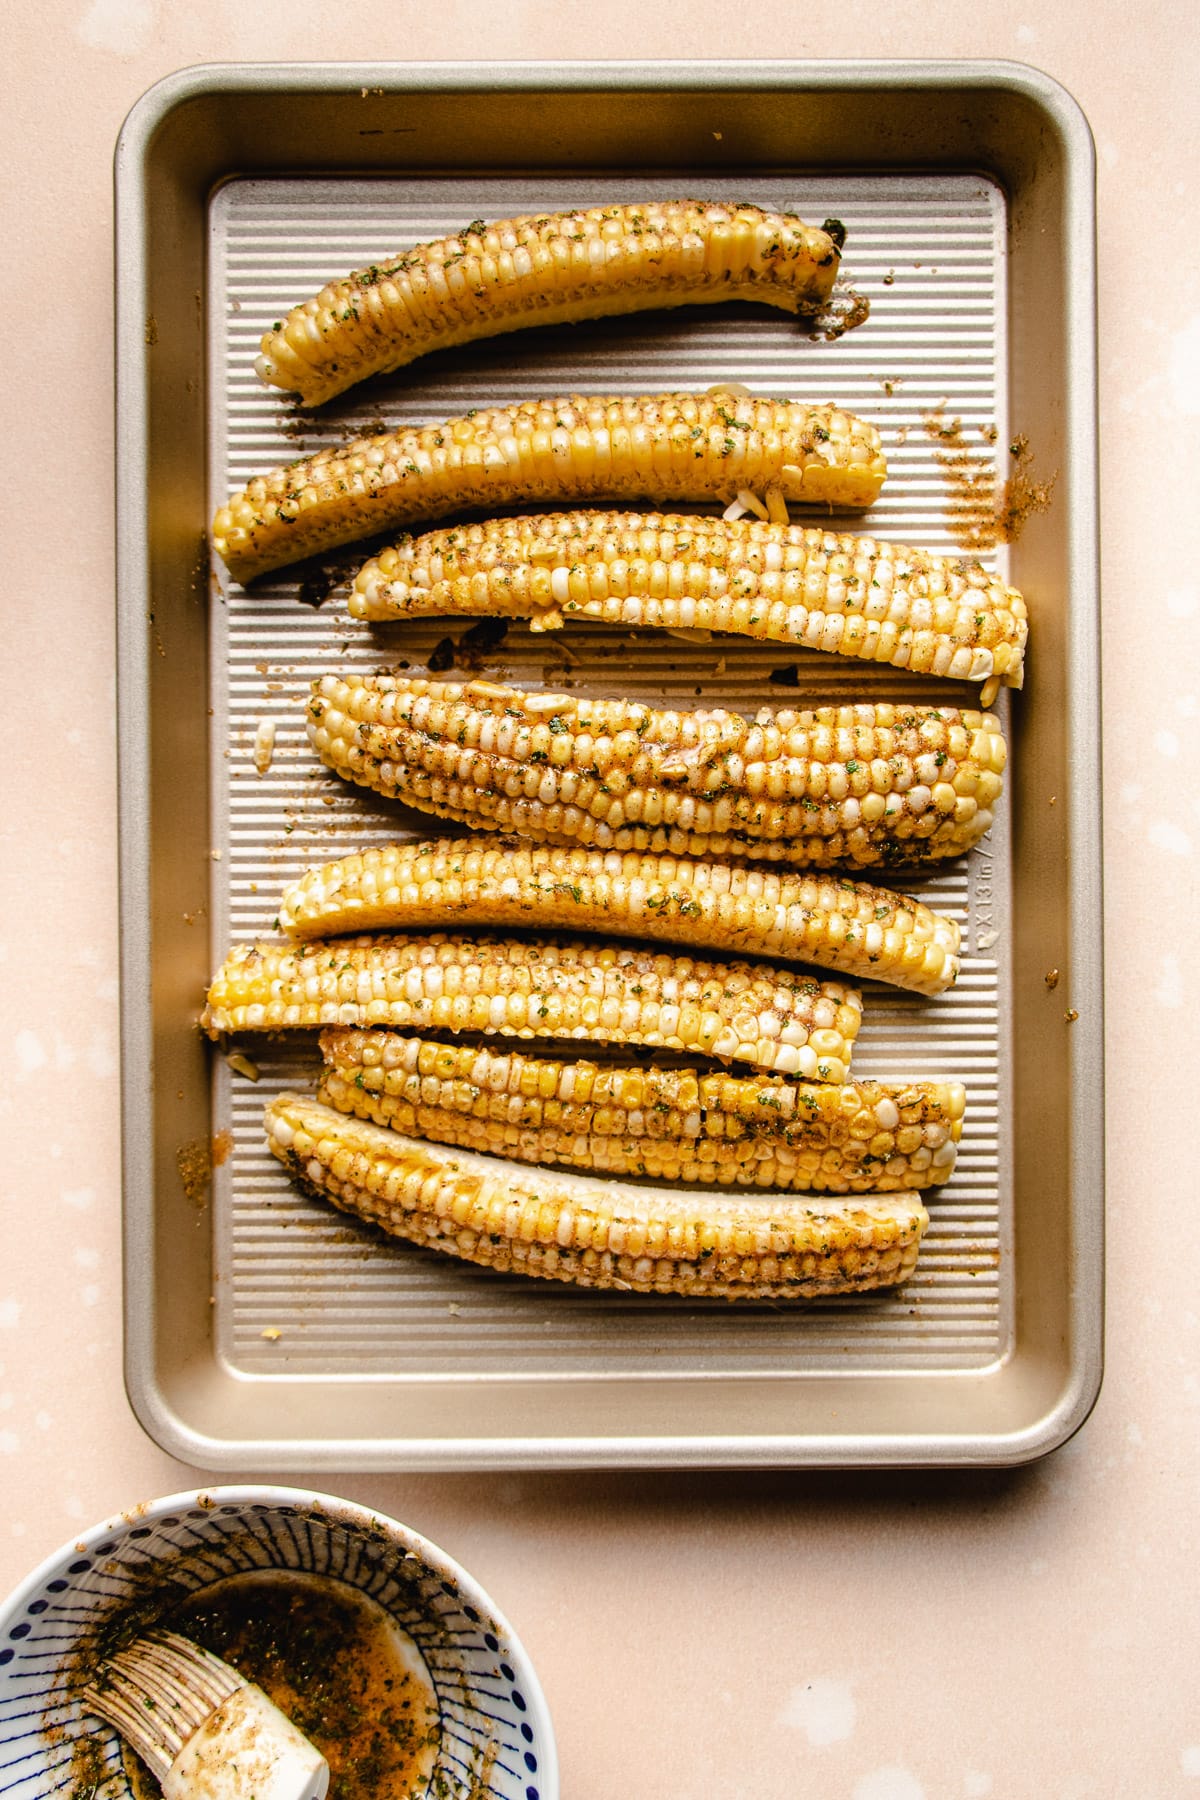 Photo shows corn cobs brushed with butter sauce over a sheet pan